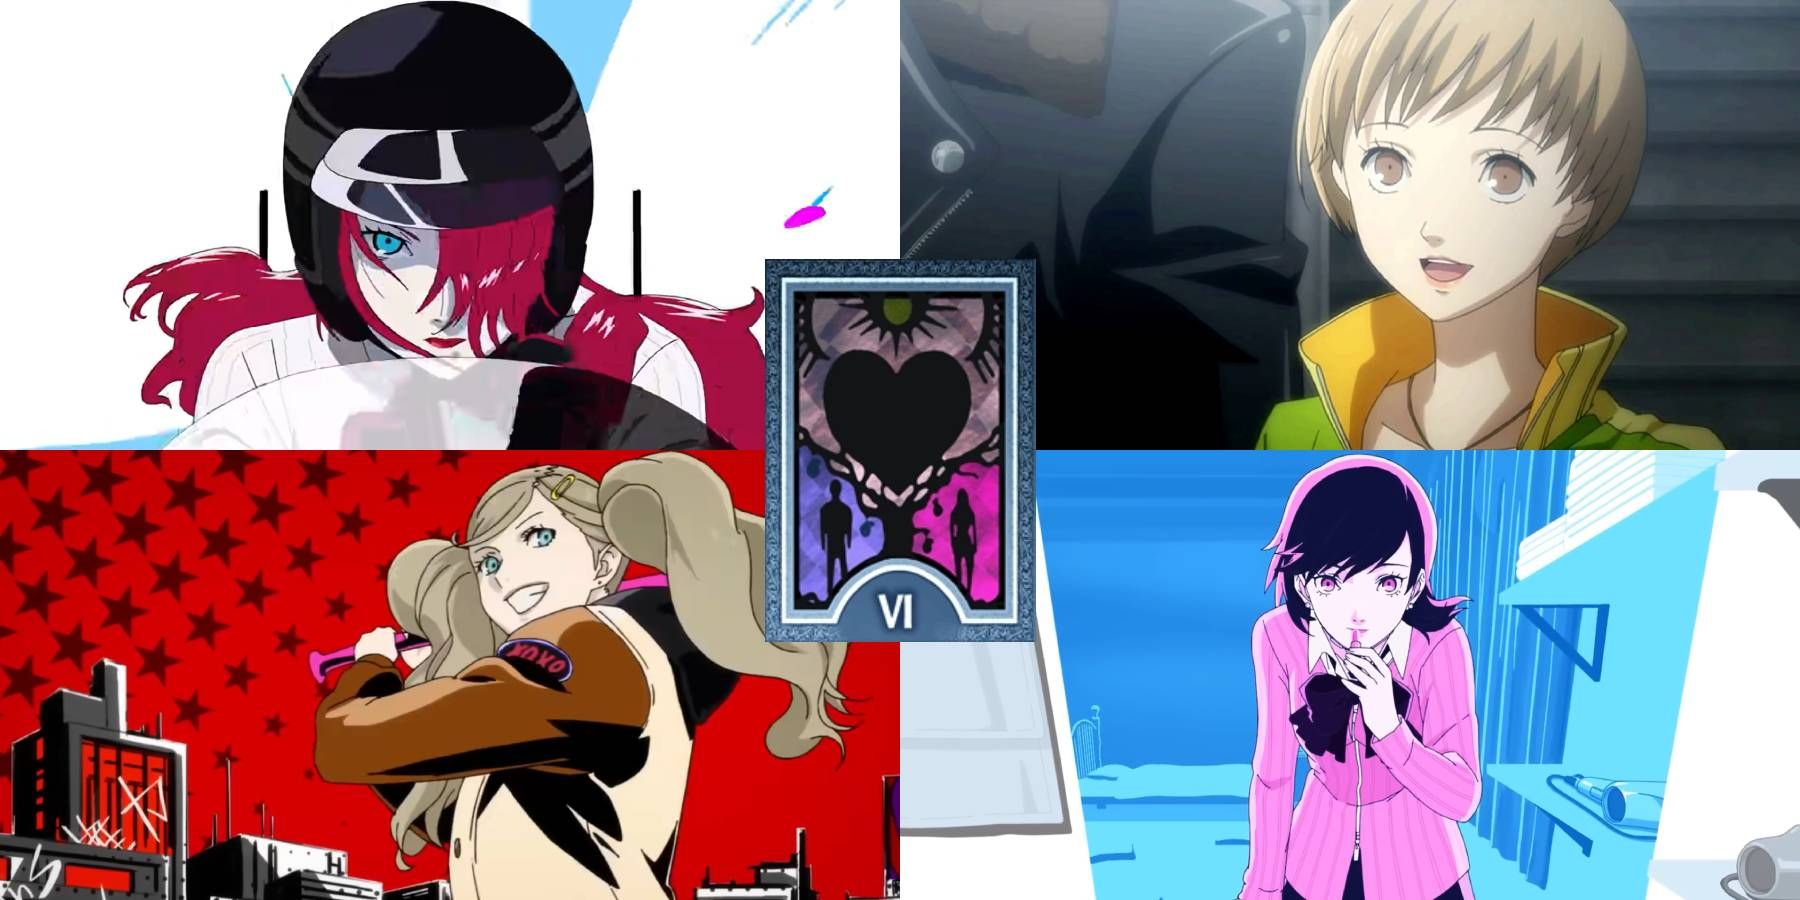 Mitsuru, Chie, Ann, and Yukari with the Lovers card from the Persona series